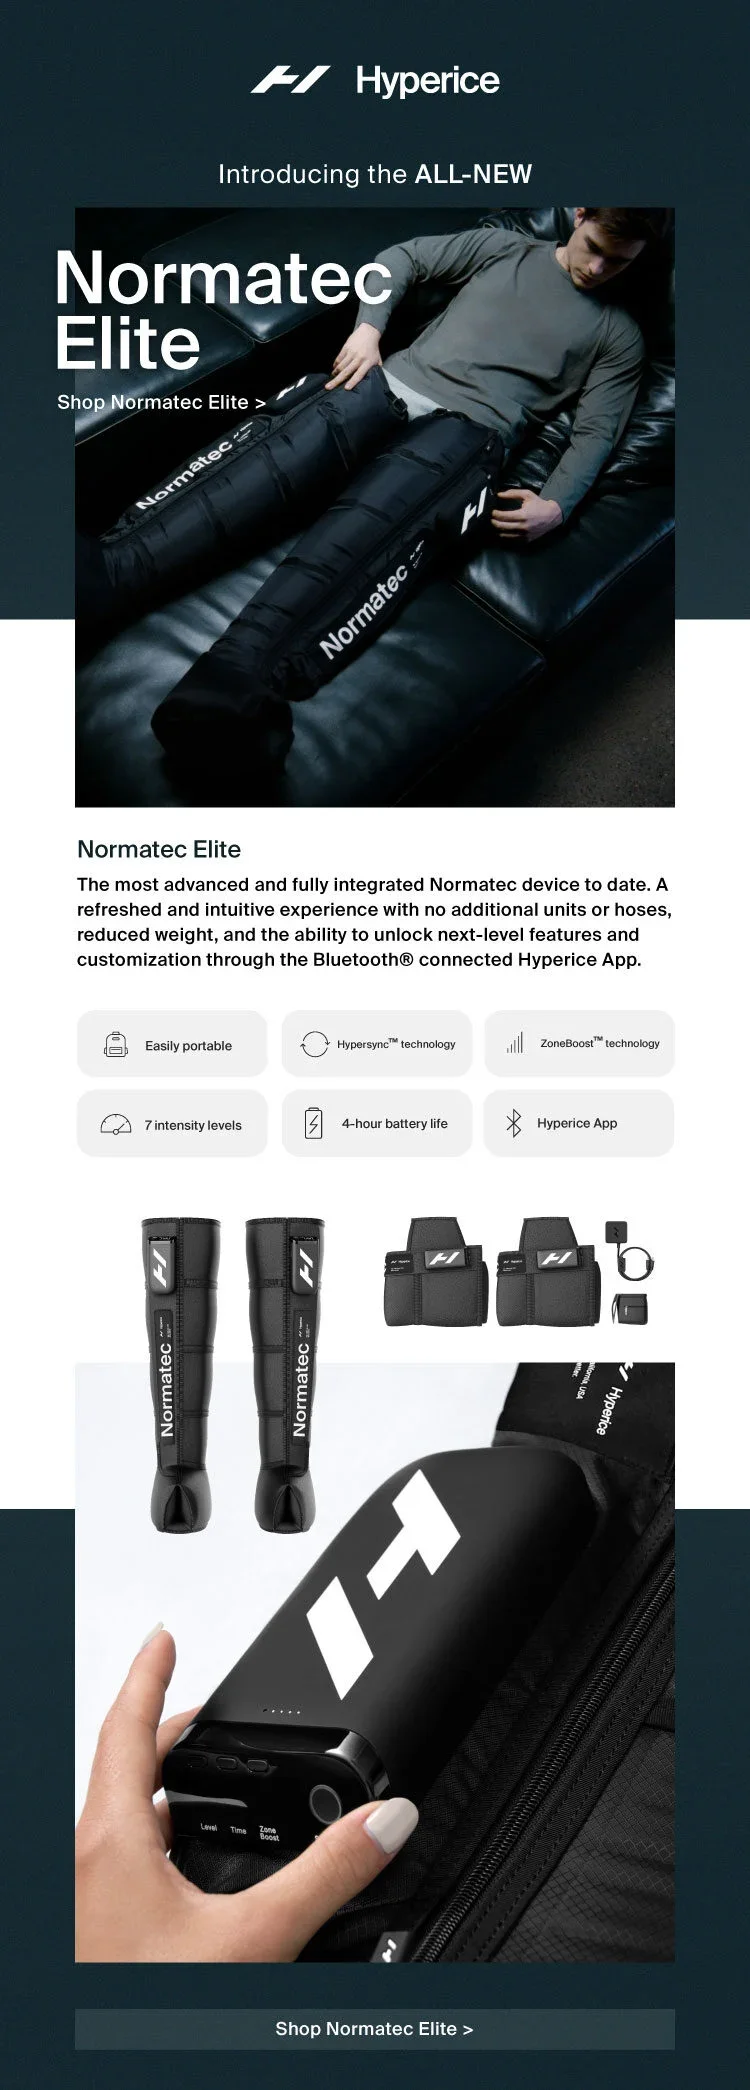 Introducing the ALL-NEW Normatec Elite